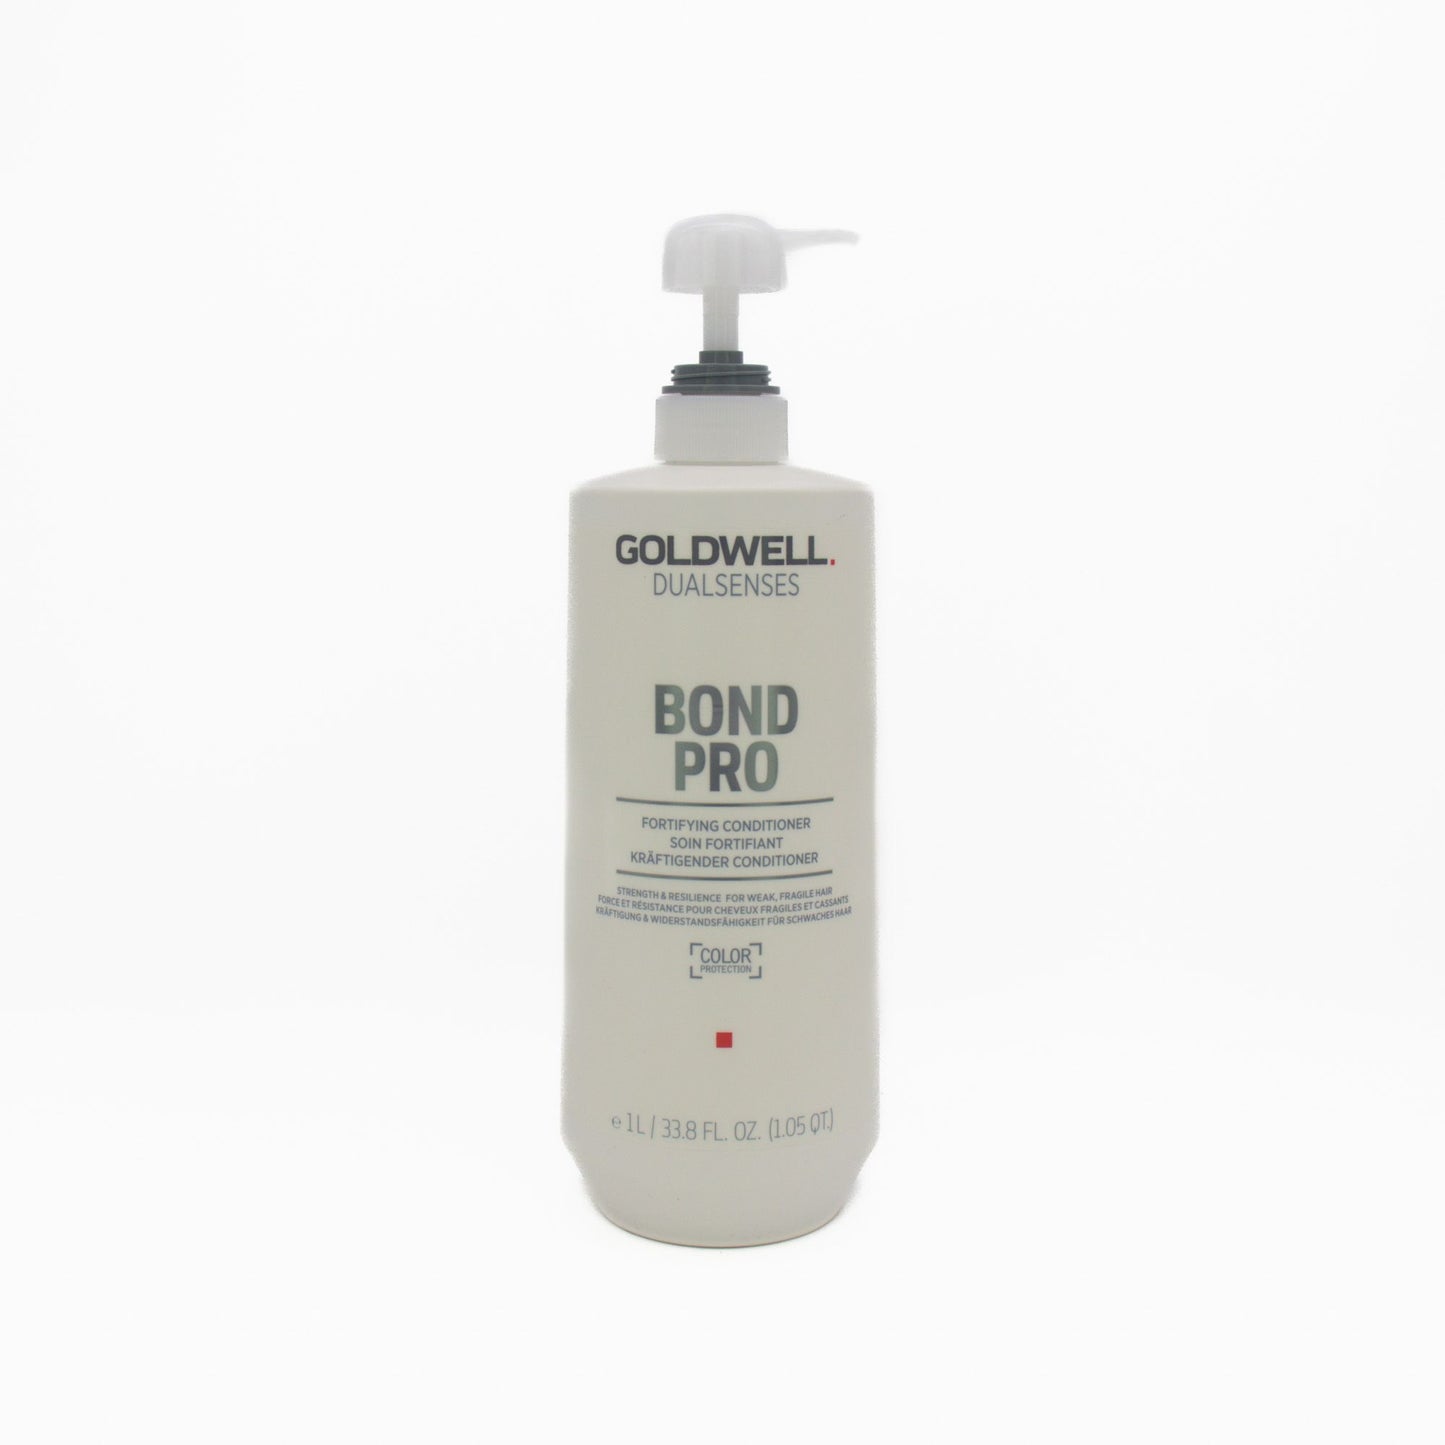 Goldwell Bond Pro Fortifying Conditioner 1000ml -  Imperfect Container - This is Beauty UK